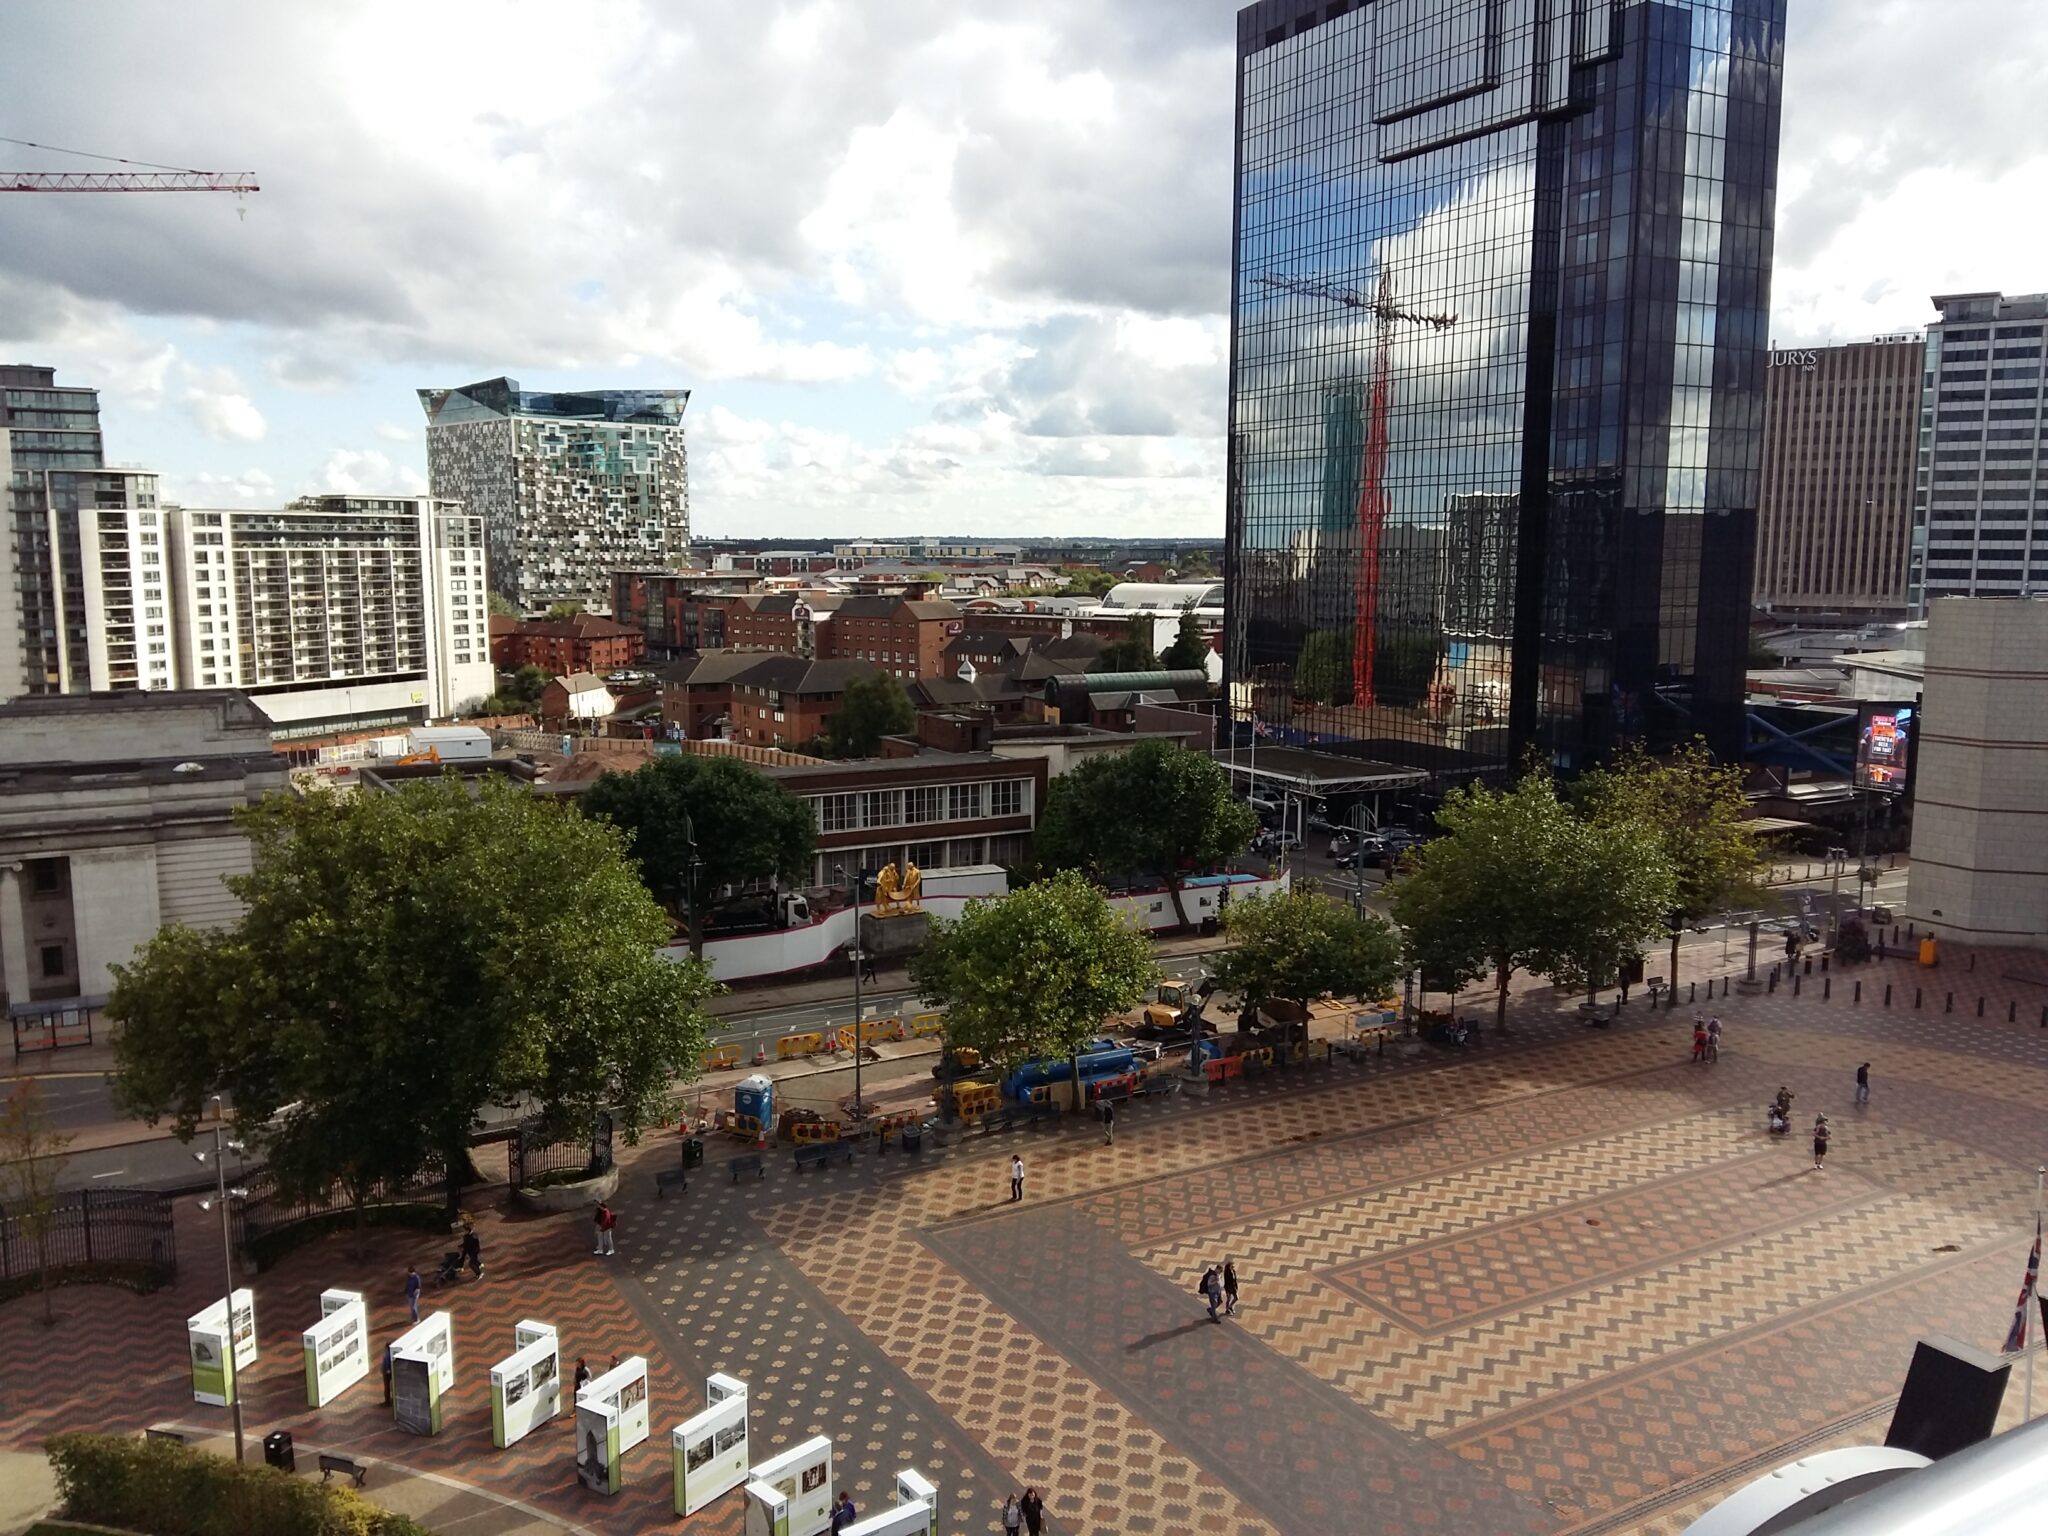 View from Birmingham Library viewing platform